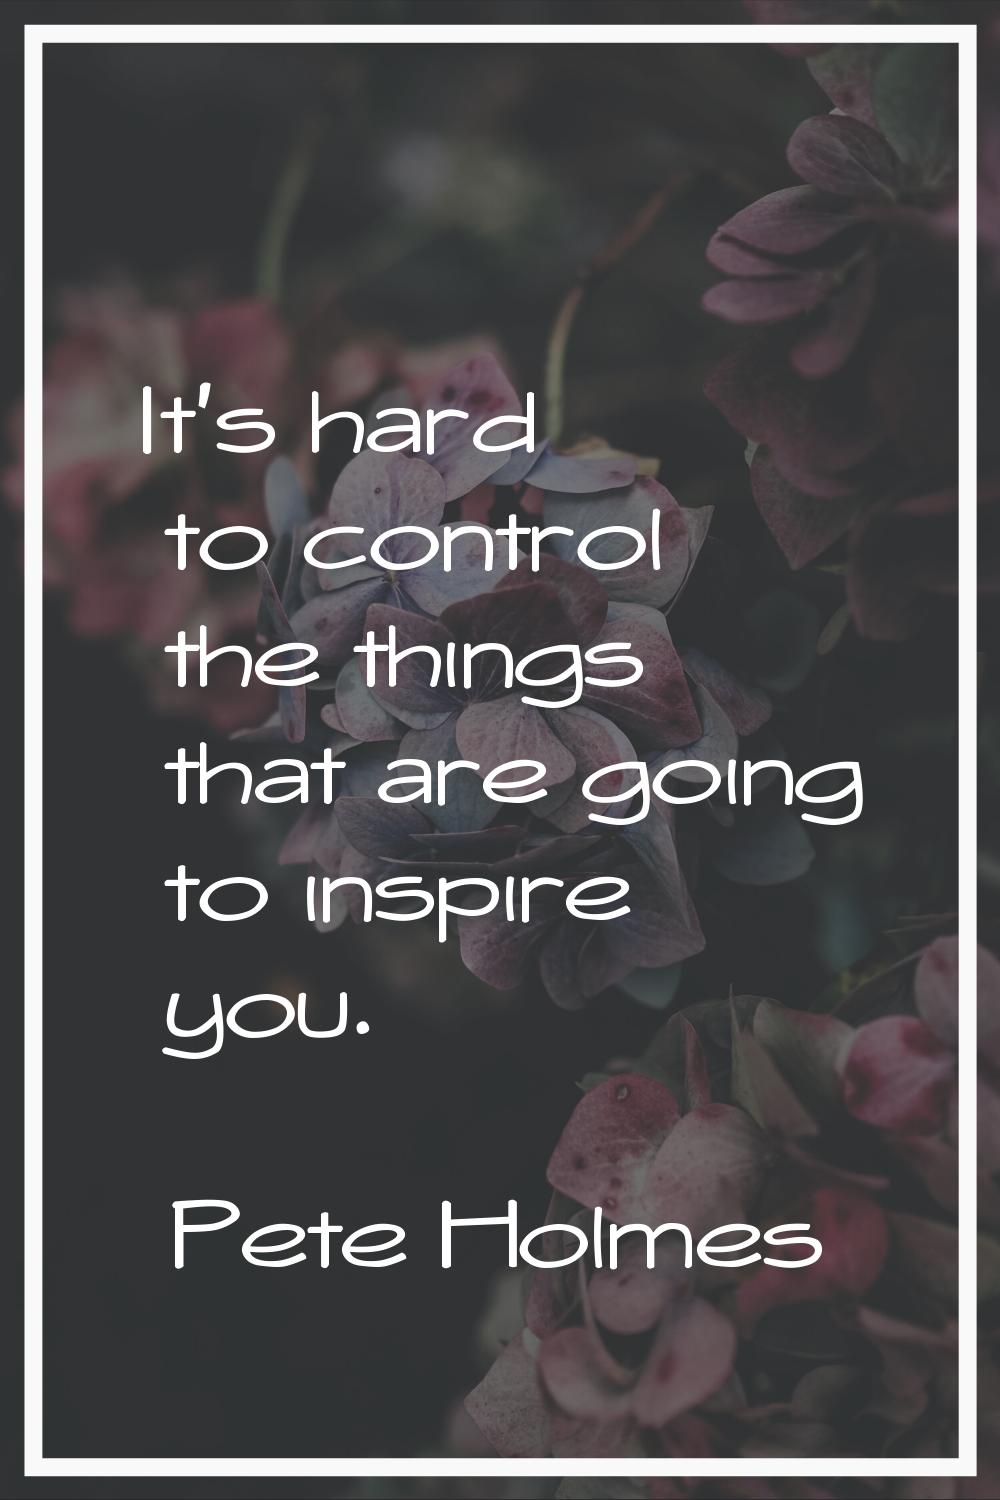 It's hard to control the things that are going to inspire you.